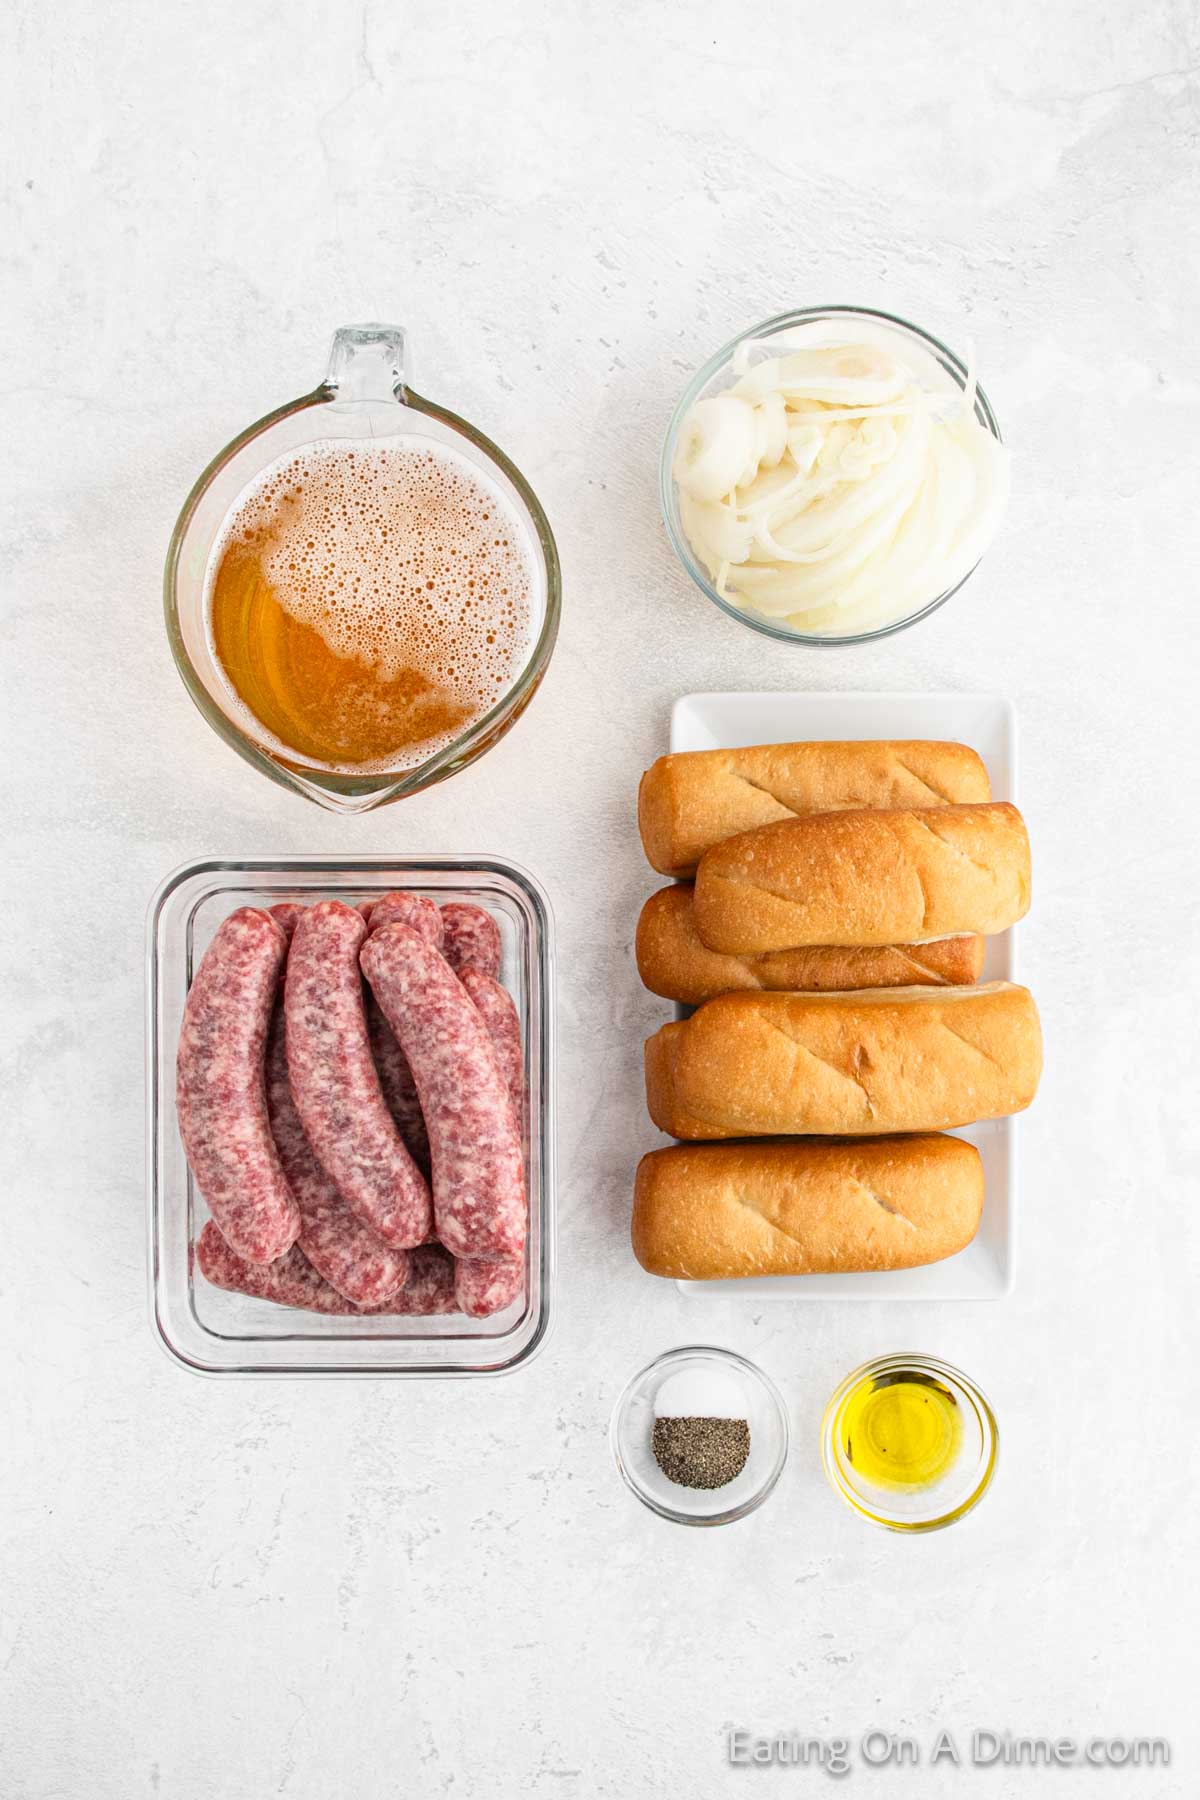 Bear, onions, rolls, and raw brats, oil and seasoning